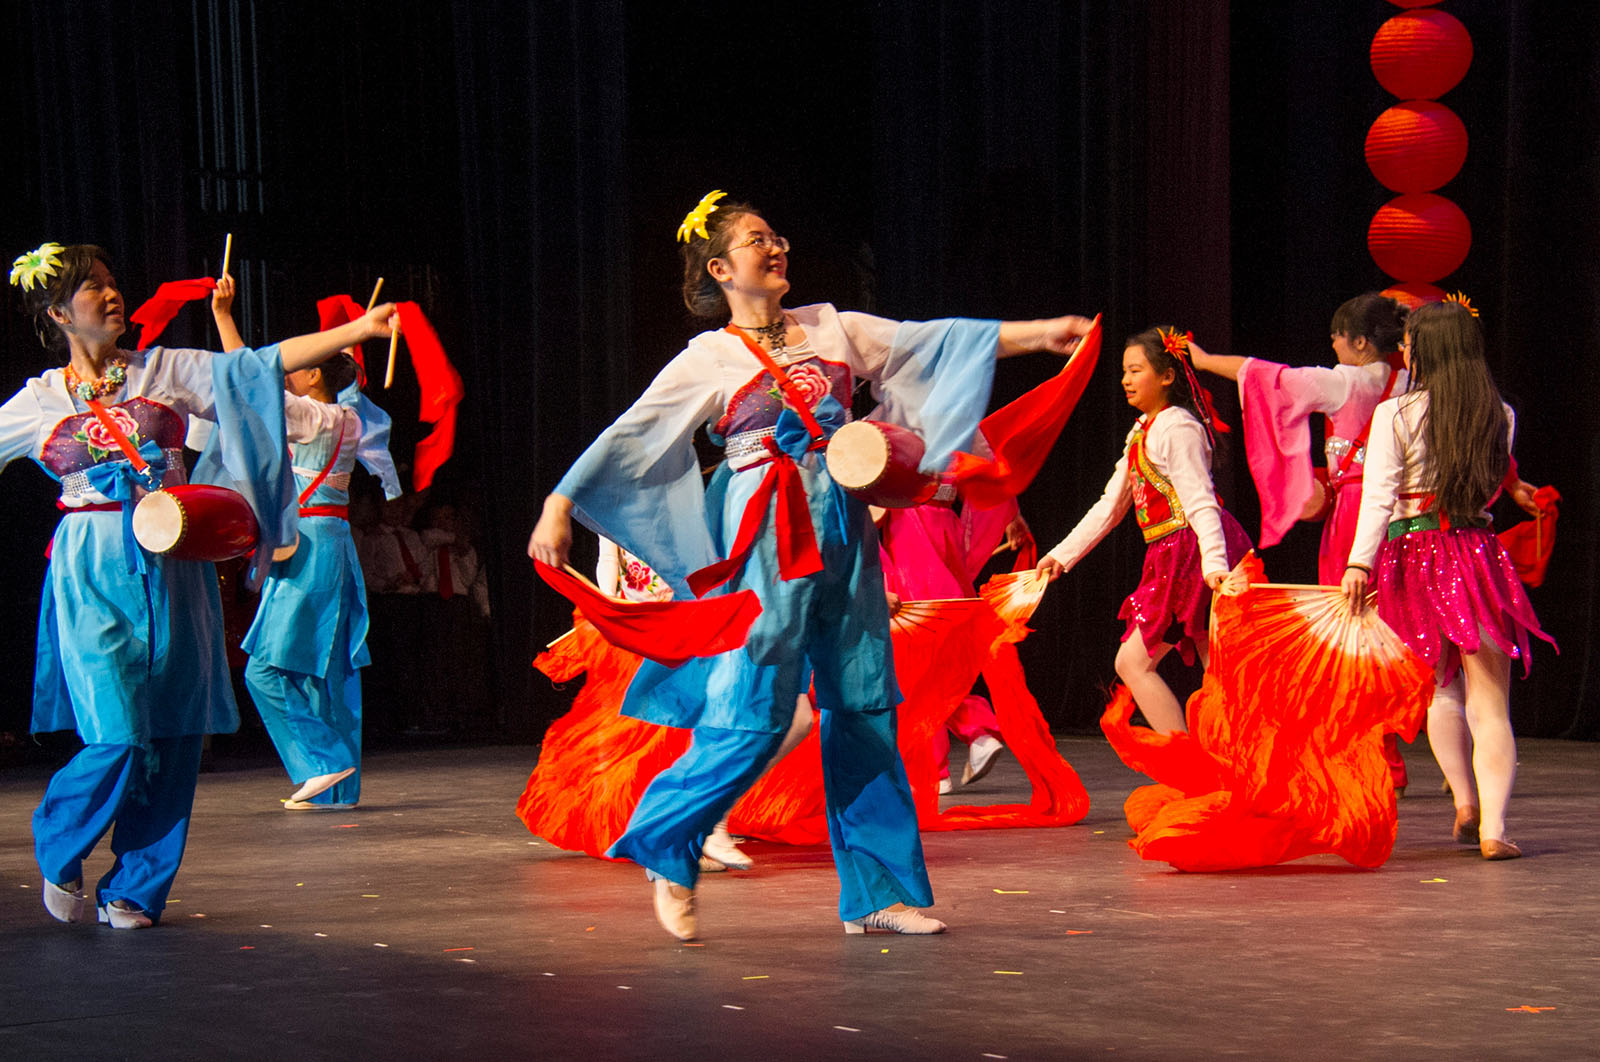 UAlbany students, faculty and staff celebrating Chinese New Year